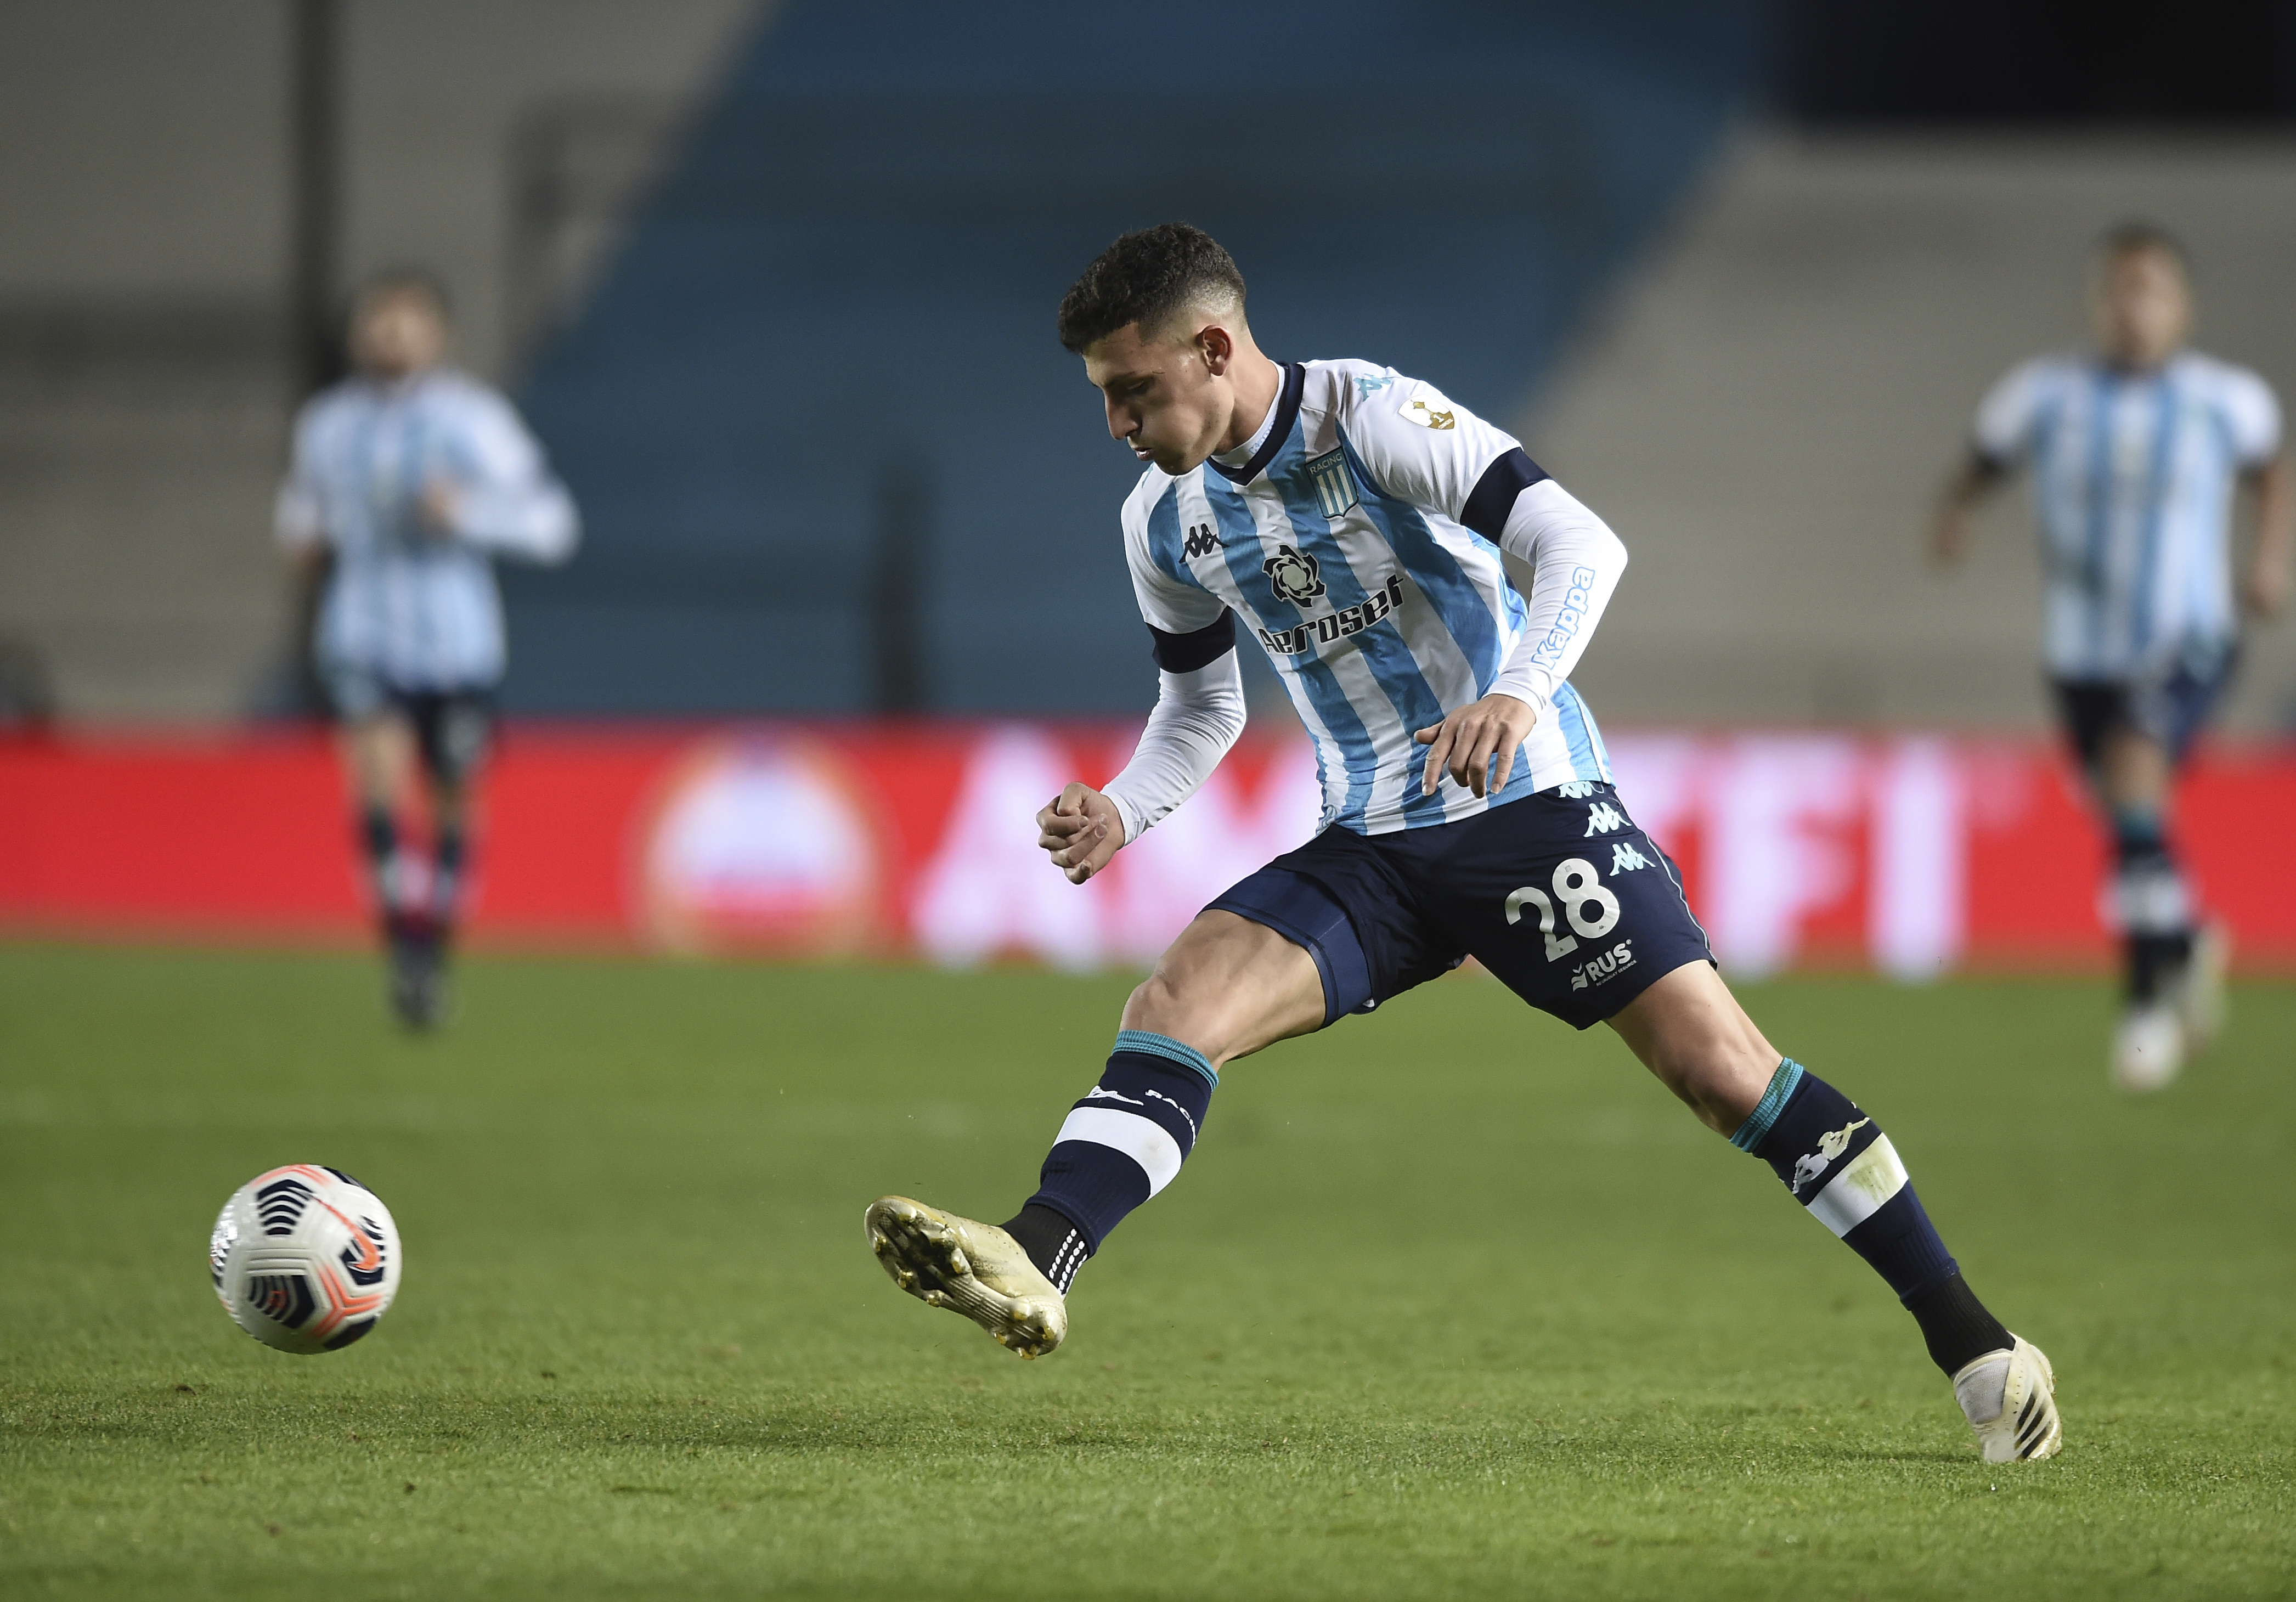 Charlotte FC Signs Forward Enzo Copetti from Racing Club